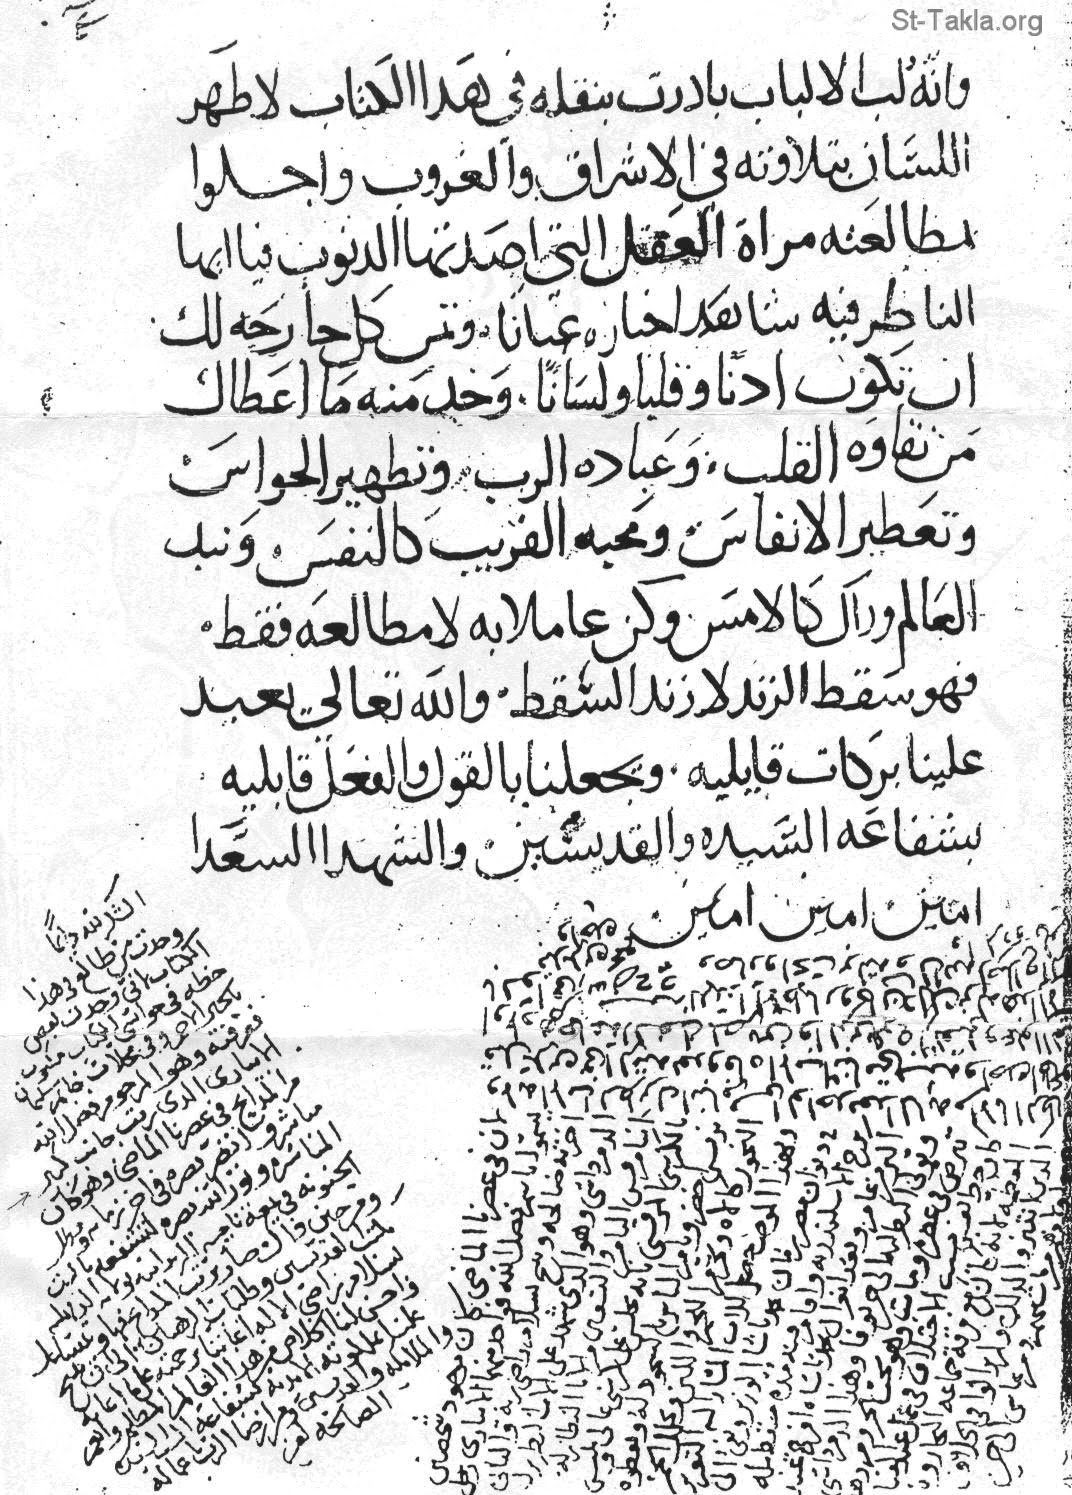 St-Takla.org Image: Page 3z (old: 5z) from Arabic manuscript #283 from the French National Library, Paris     :  3  (5   )   283      